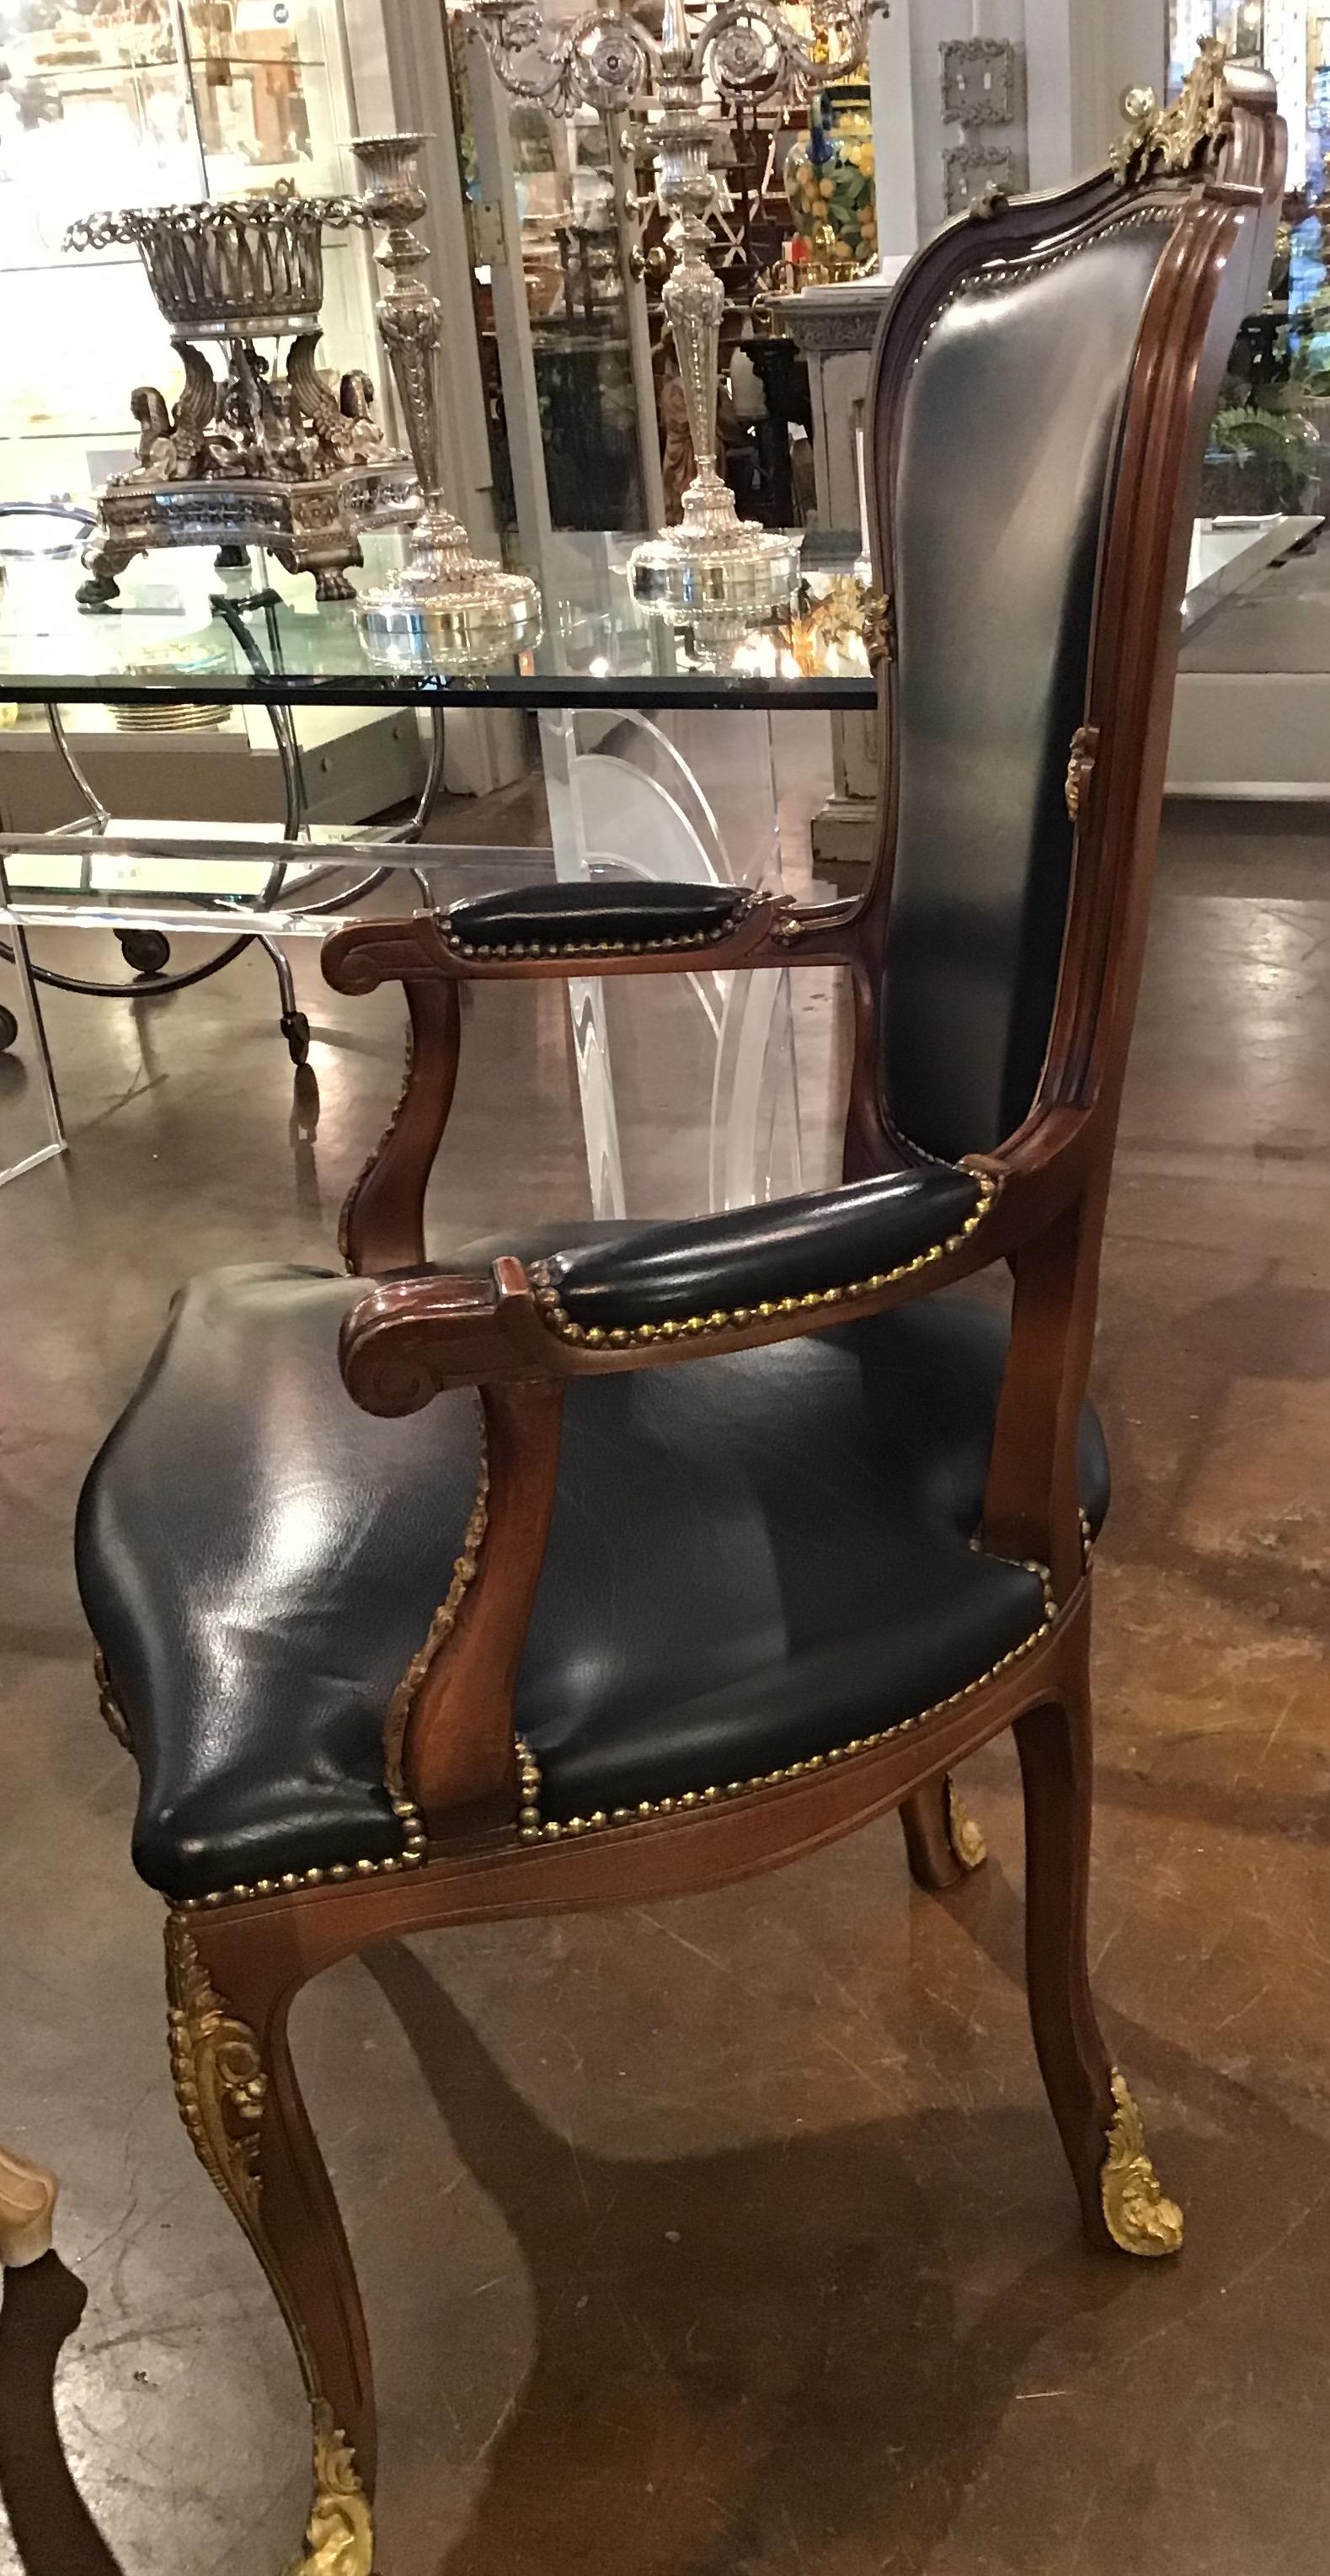 Large vintage armchair in Louis XV style with black leather upholstery and bronze mounts. Chair is sturdy and heavy, made in generous size. Nice and stylish piece, would work great for office or library.

Very good vintage condition, wear natural to